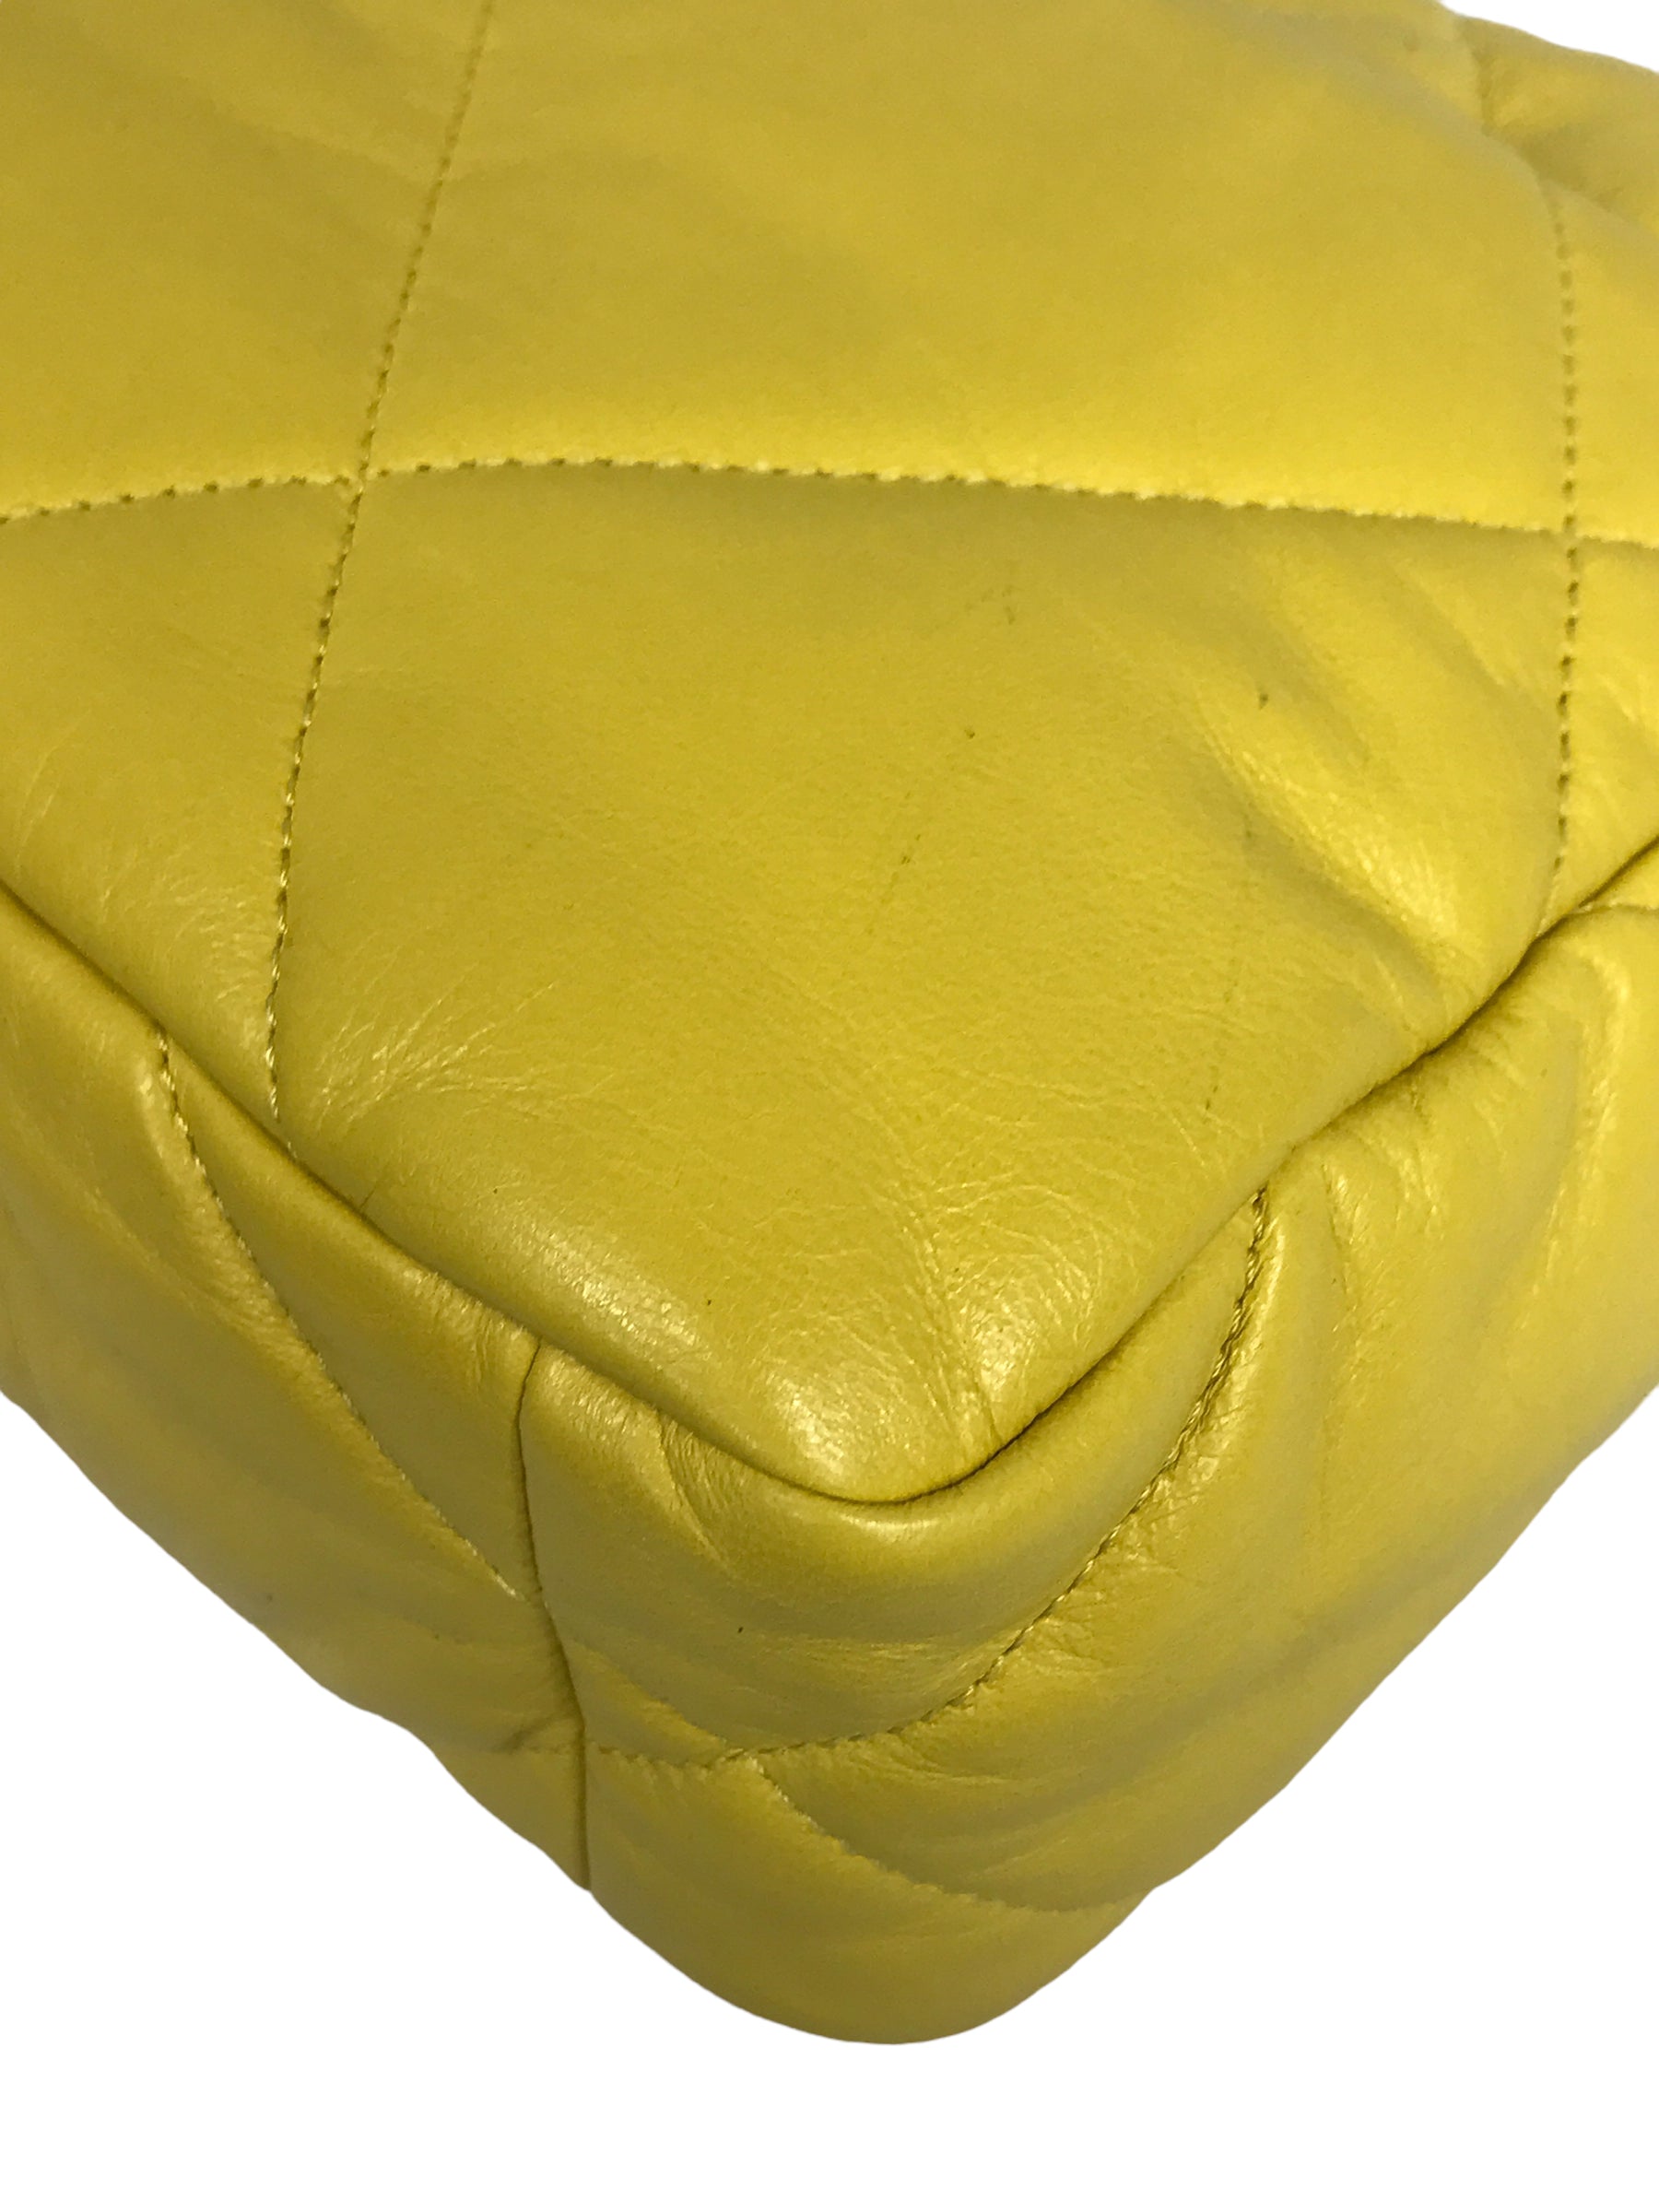 20B1 Yellow Clair Goatskin Quilted 19 Small Flap W/AGHW/SHW/RHW